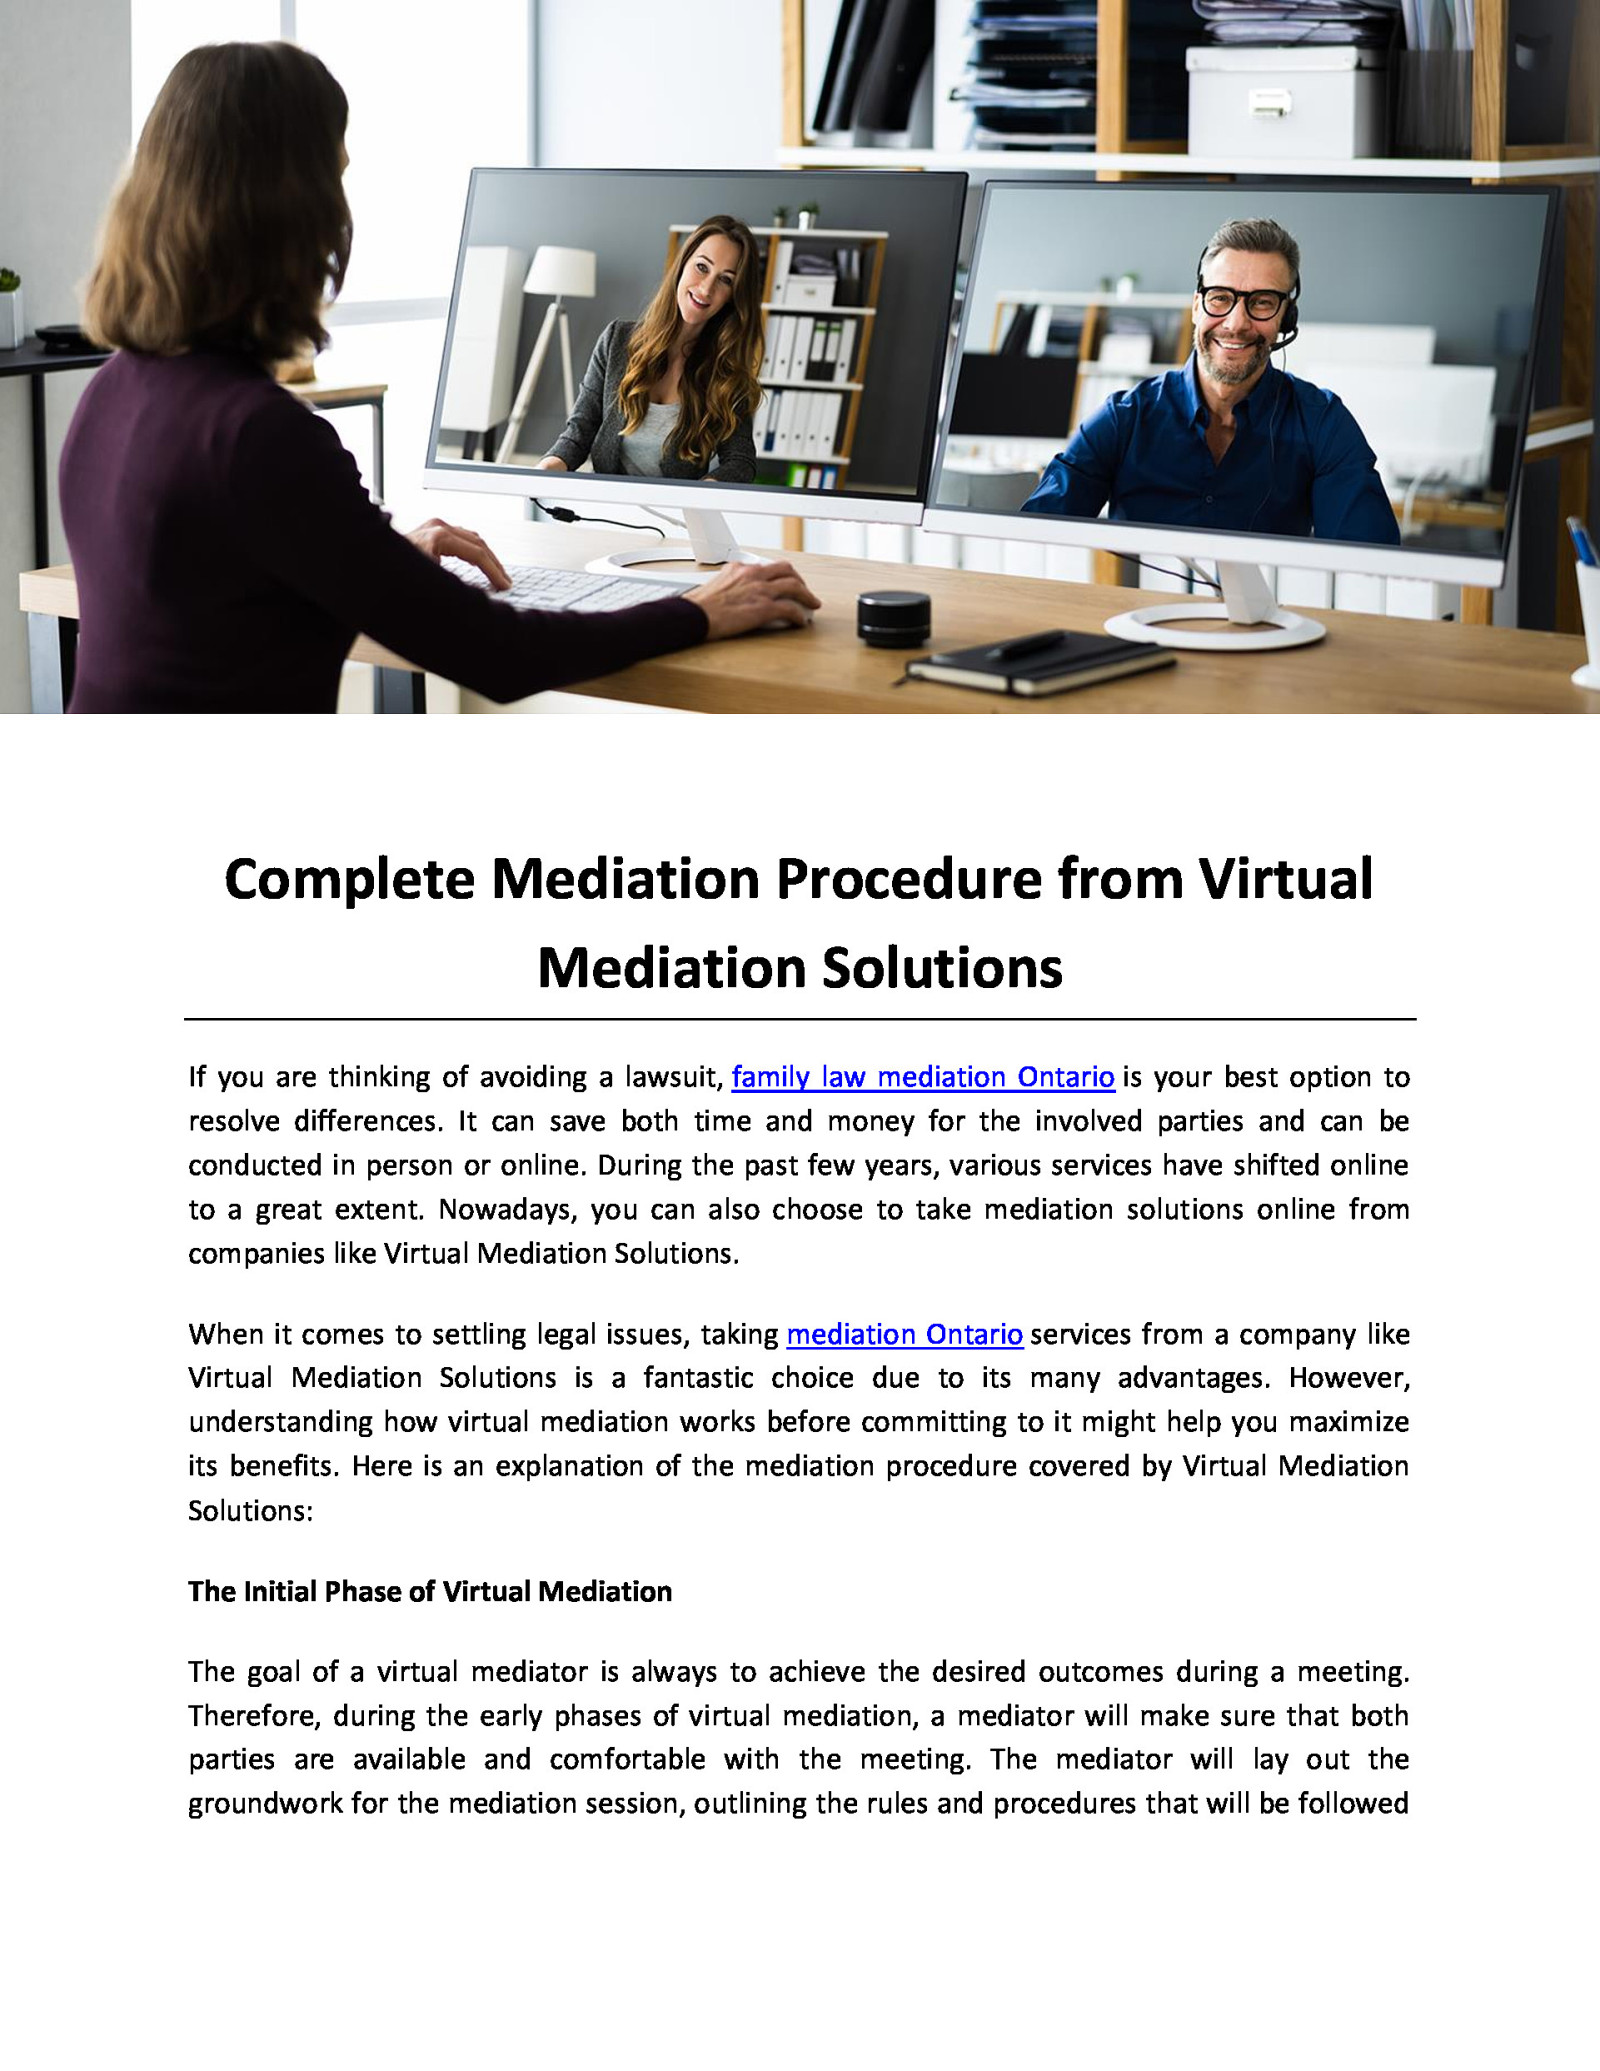 Complete Mediation Procedure from Virtual Mediation Solutions